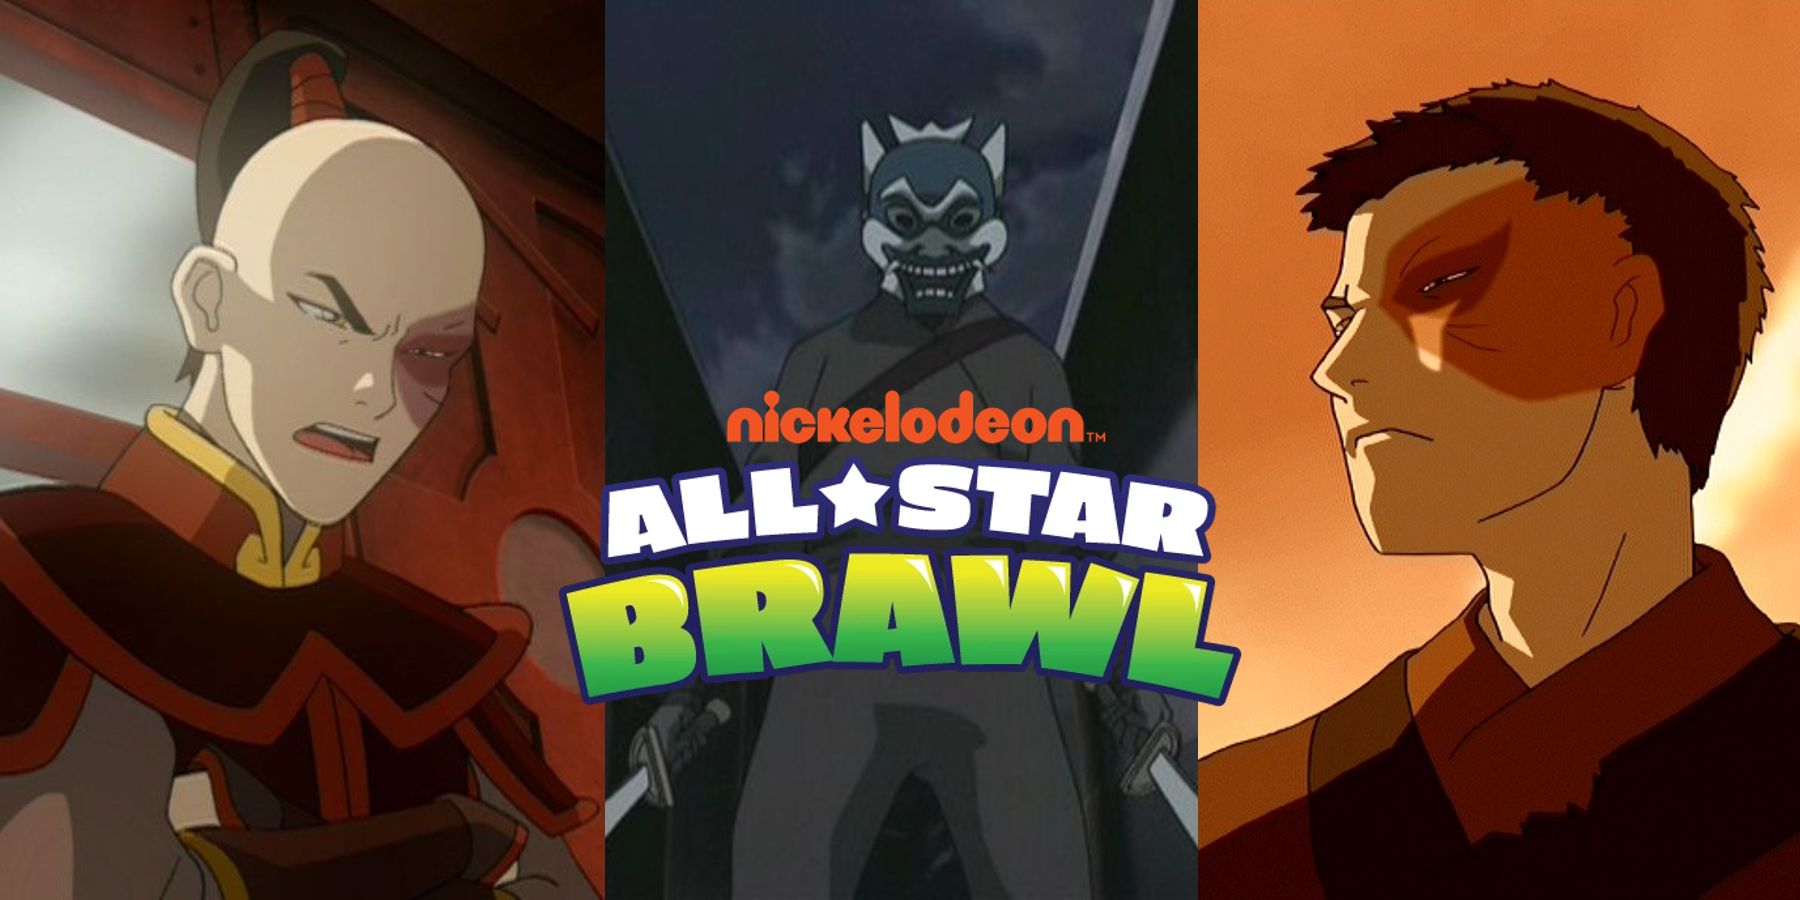 What We Hope to See From Prince Zuko in Nickelodeon All-Star Brawl